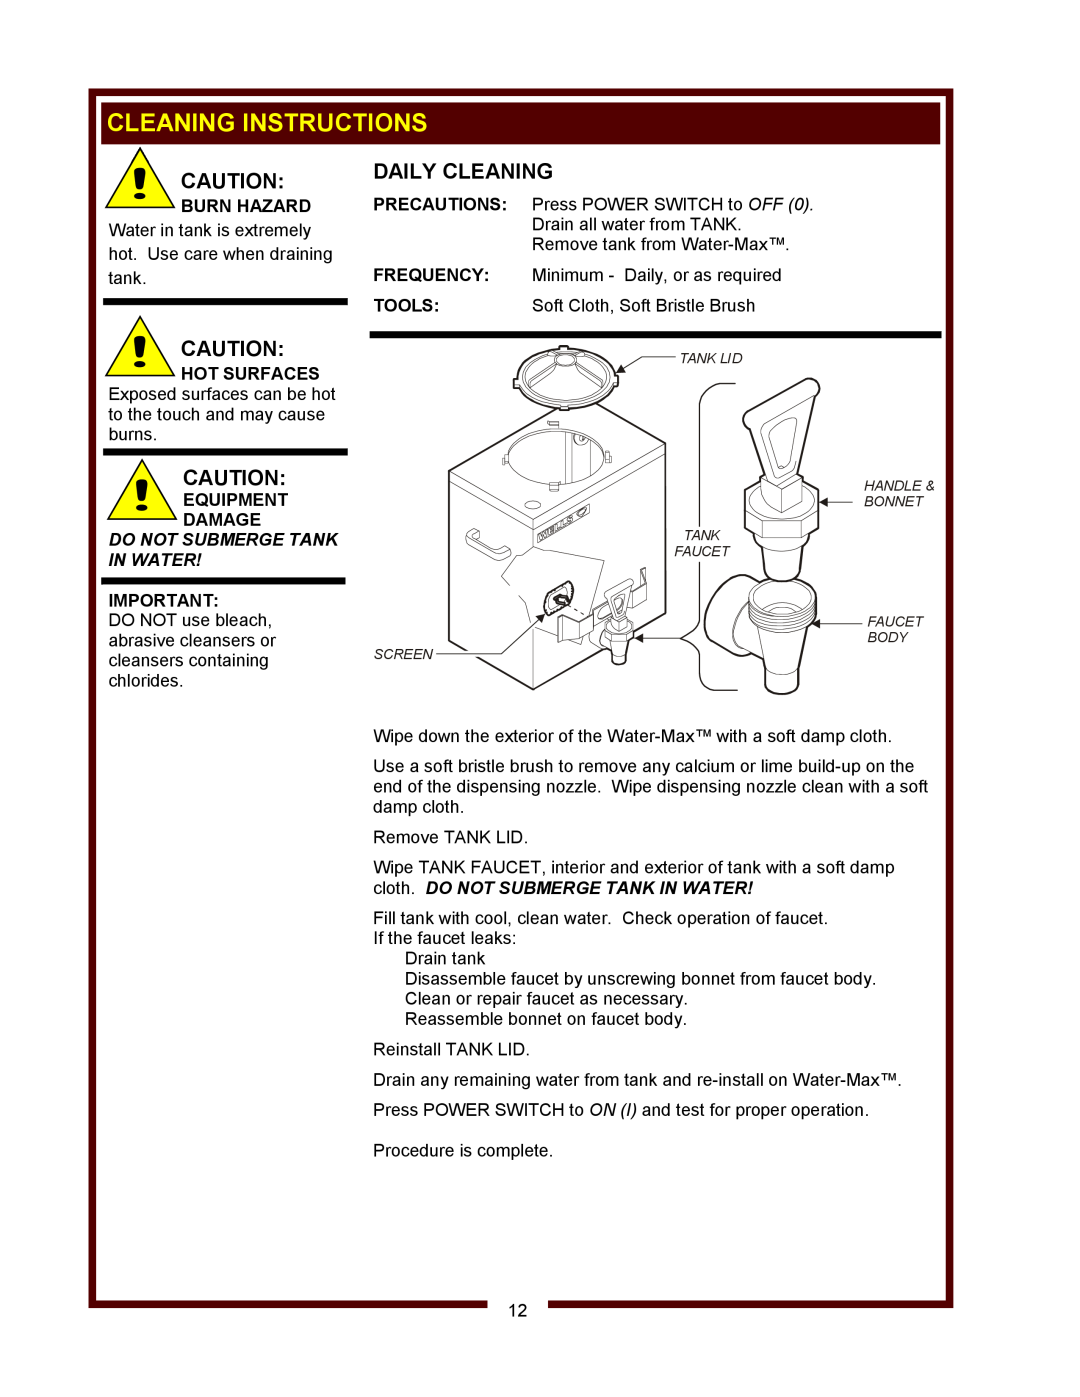 Wells WM-TR Cleaning Instructions, Daily Cleaning, Burn Hazard, Equipment Damage, Do Not Submerge Tank In Water 